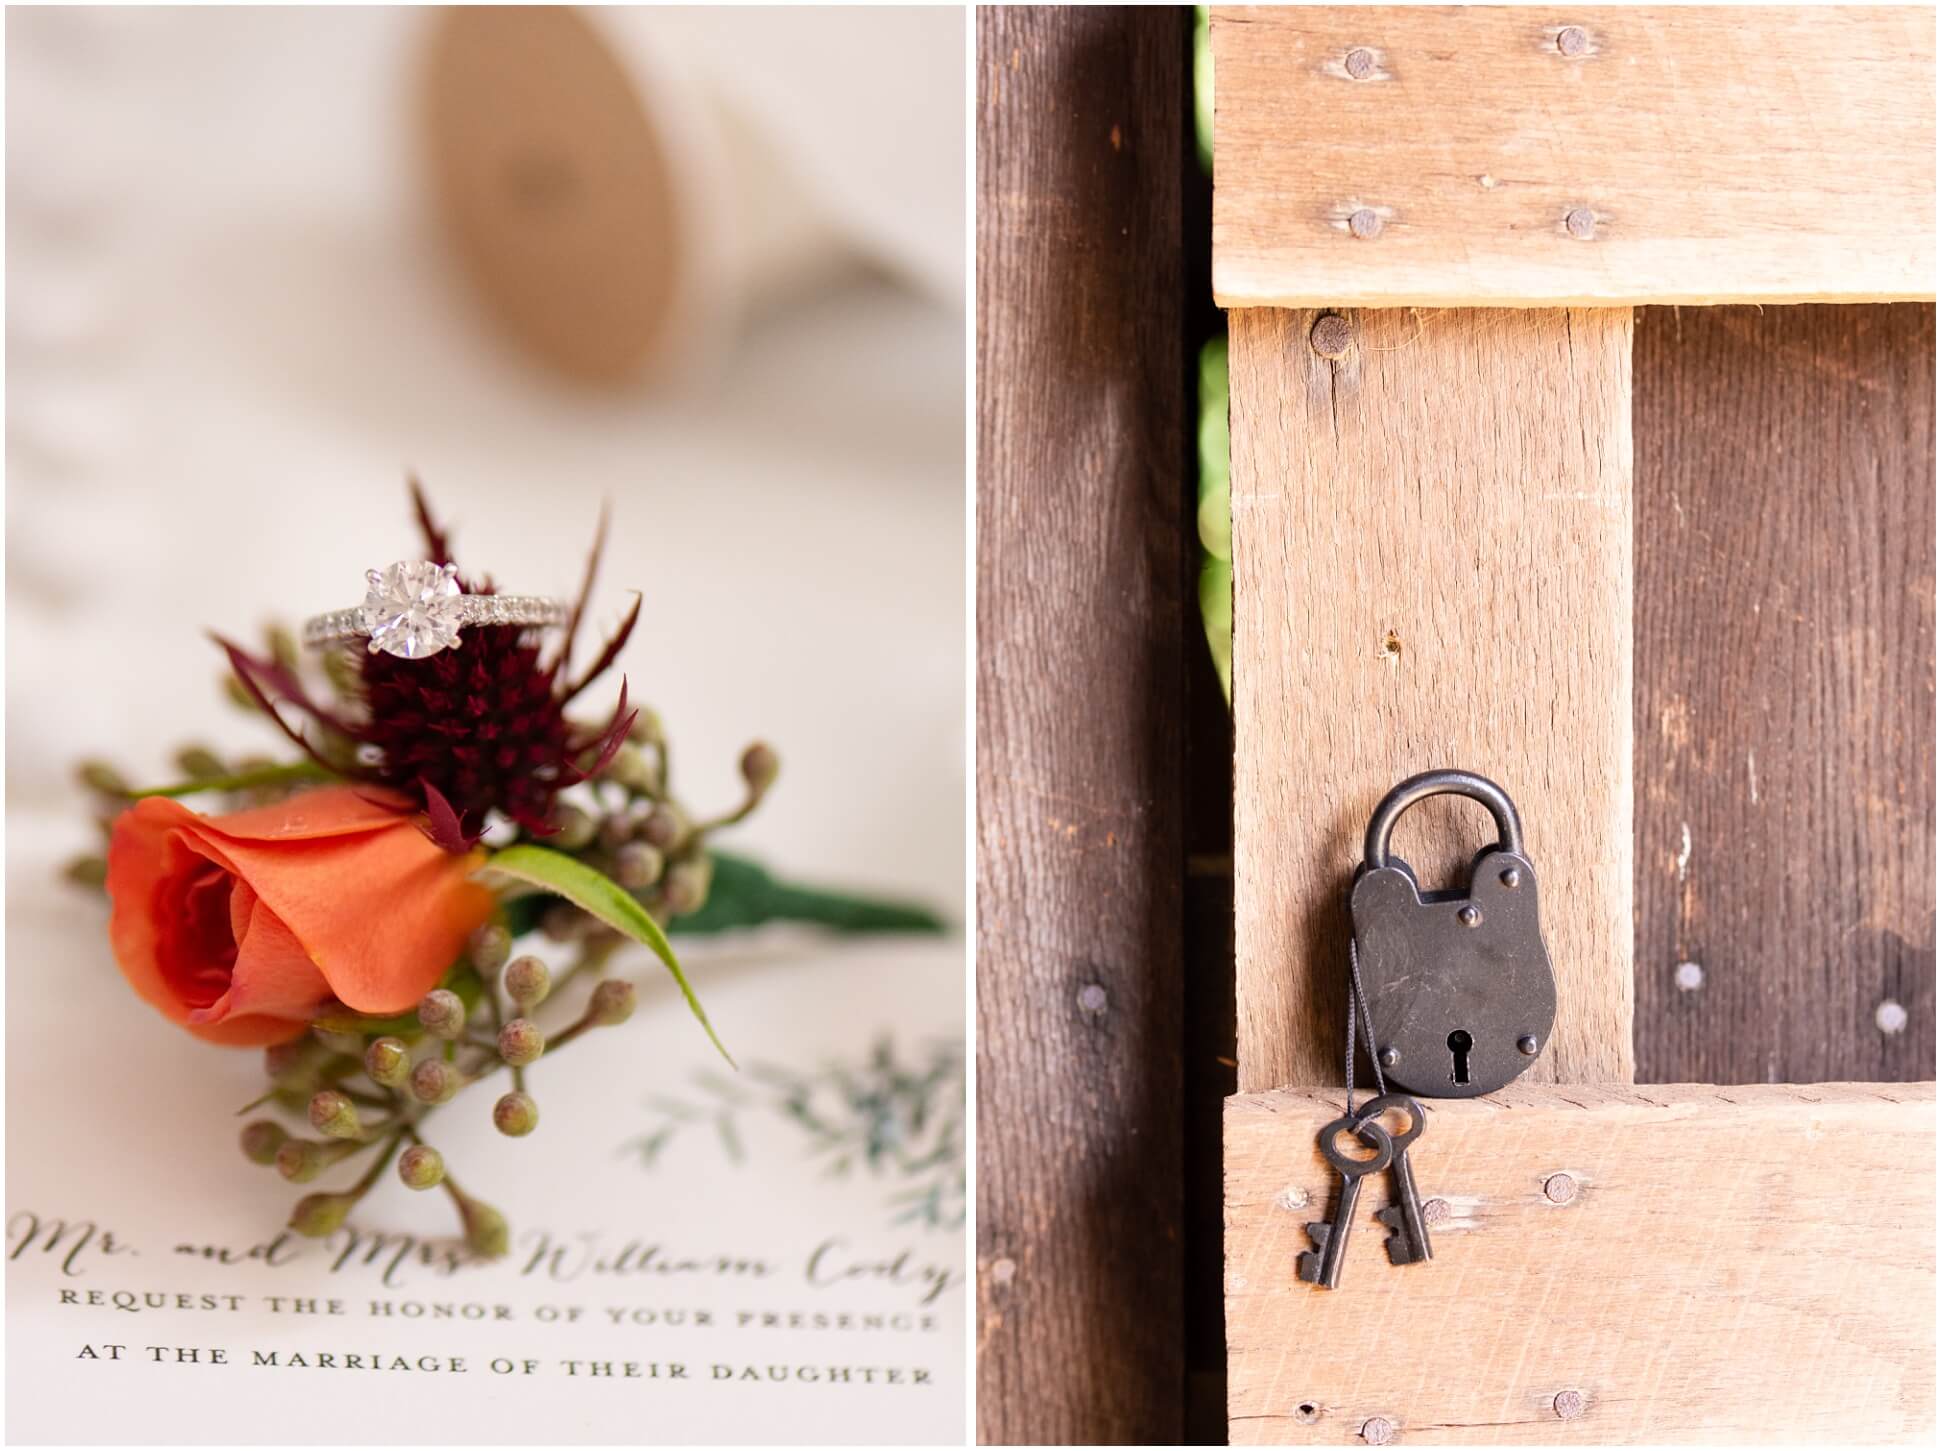 LEFT IMAGE: RING ON TOP OF BOUTONNIERE, RIGHT IMAGE: LOCK ON THE MANTEL